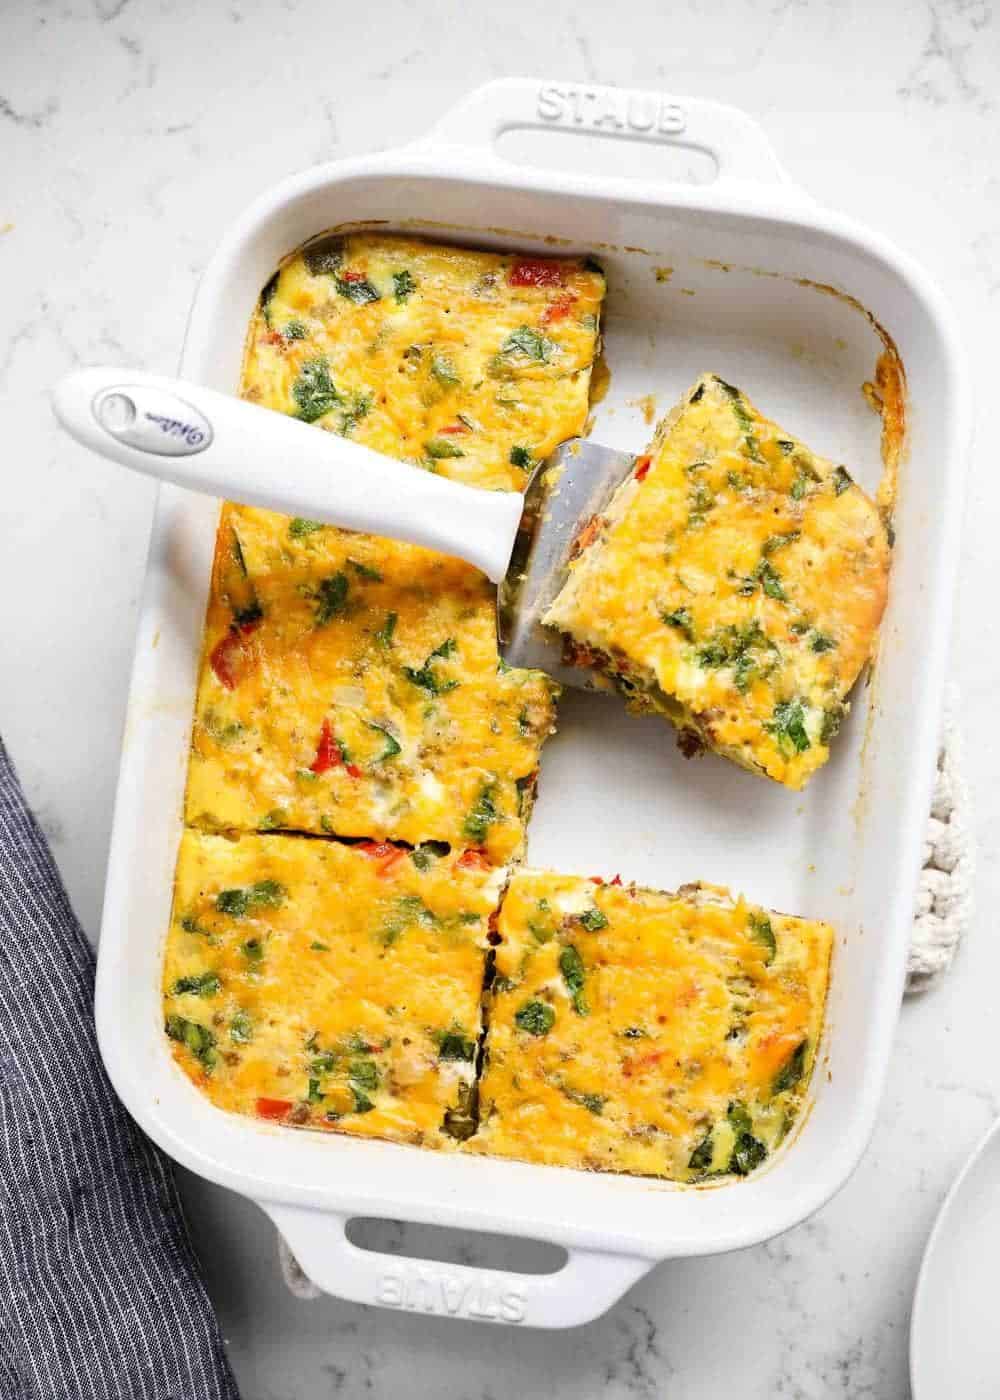 Breakfast casserole cut into squares in pan.